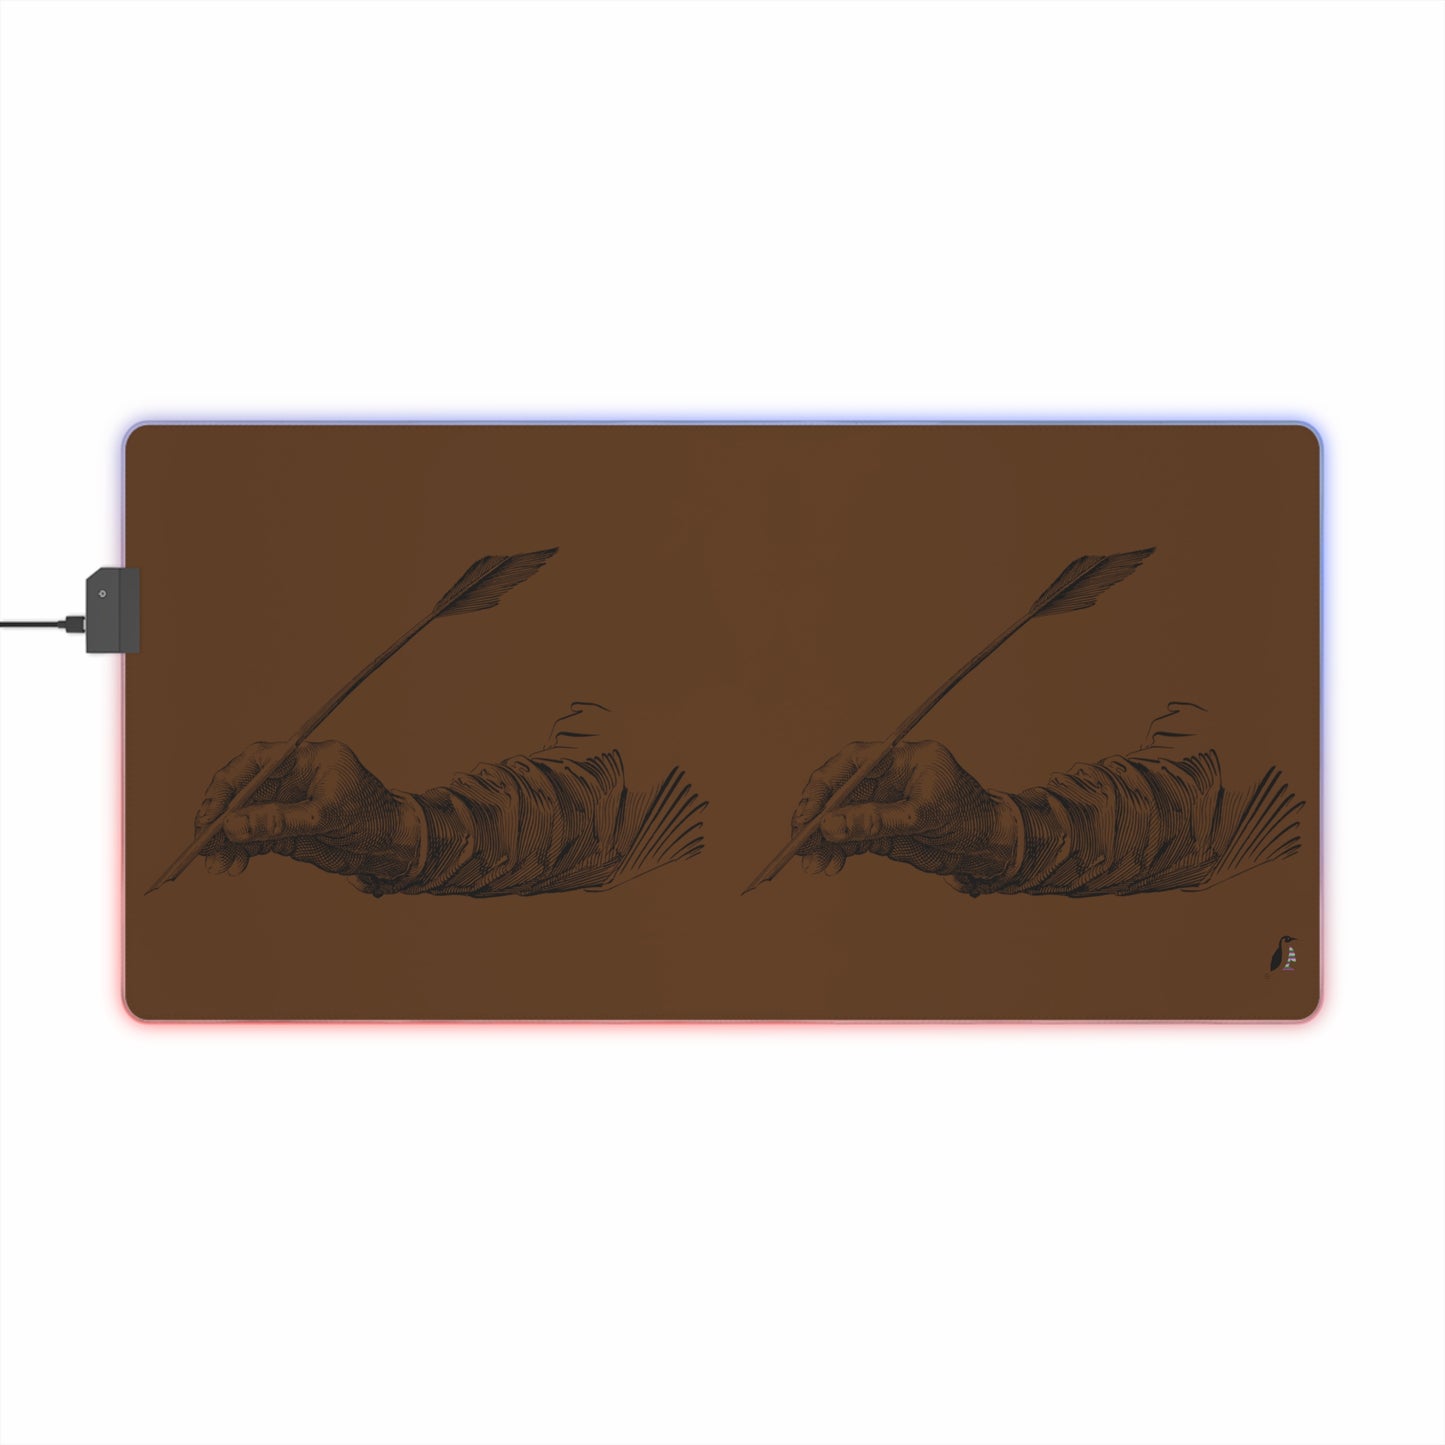 LED Gaming Mouse Pad: Writing Brown